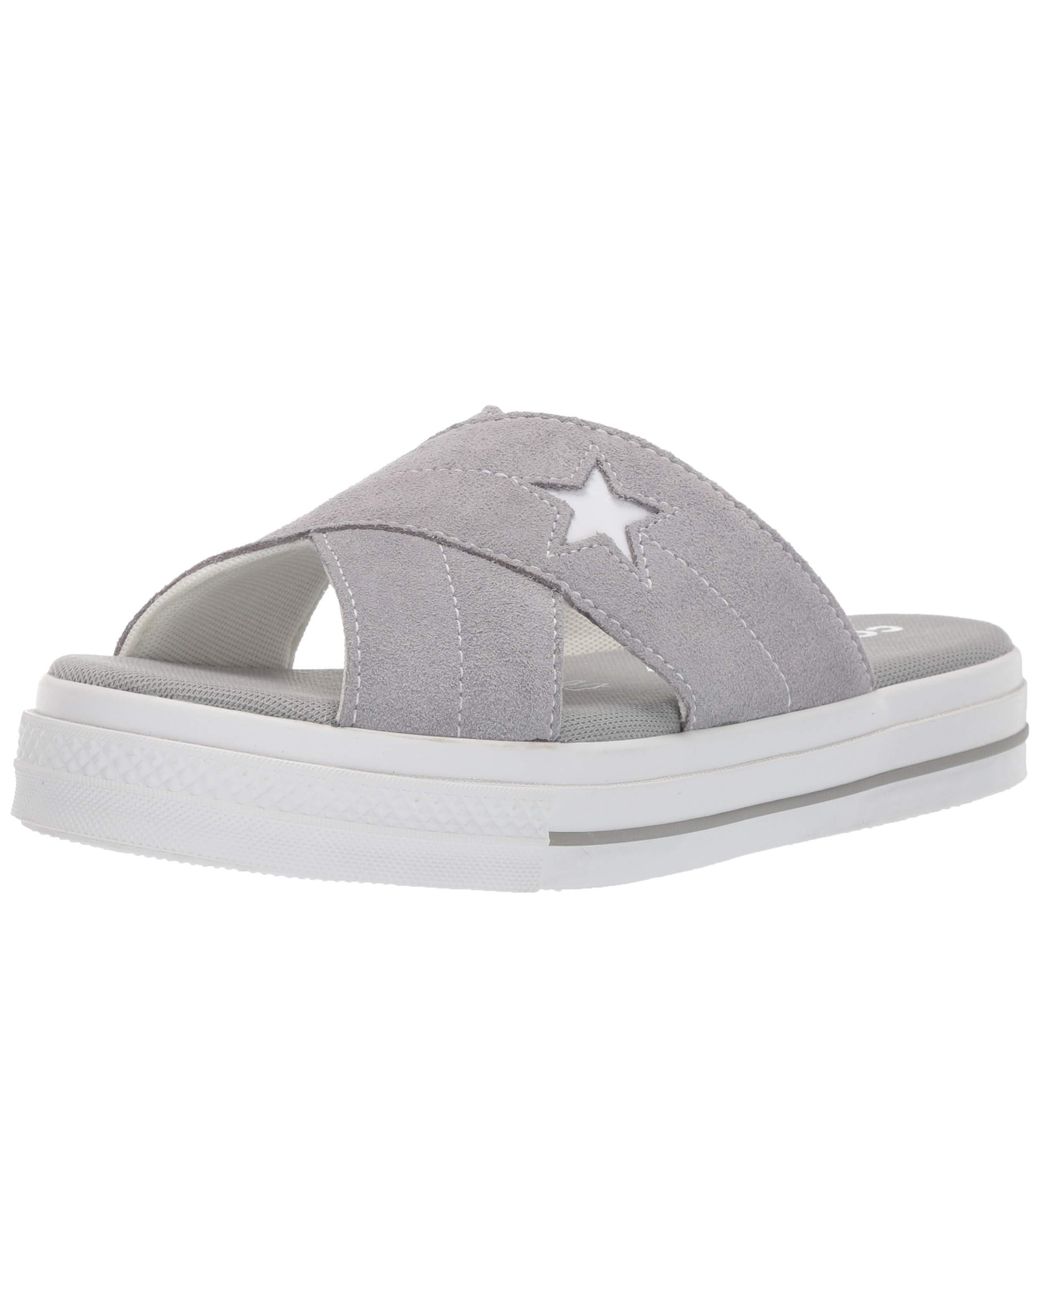 Converse Suede One Star Sandal in Grey 